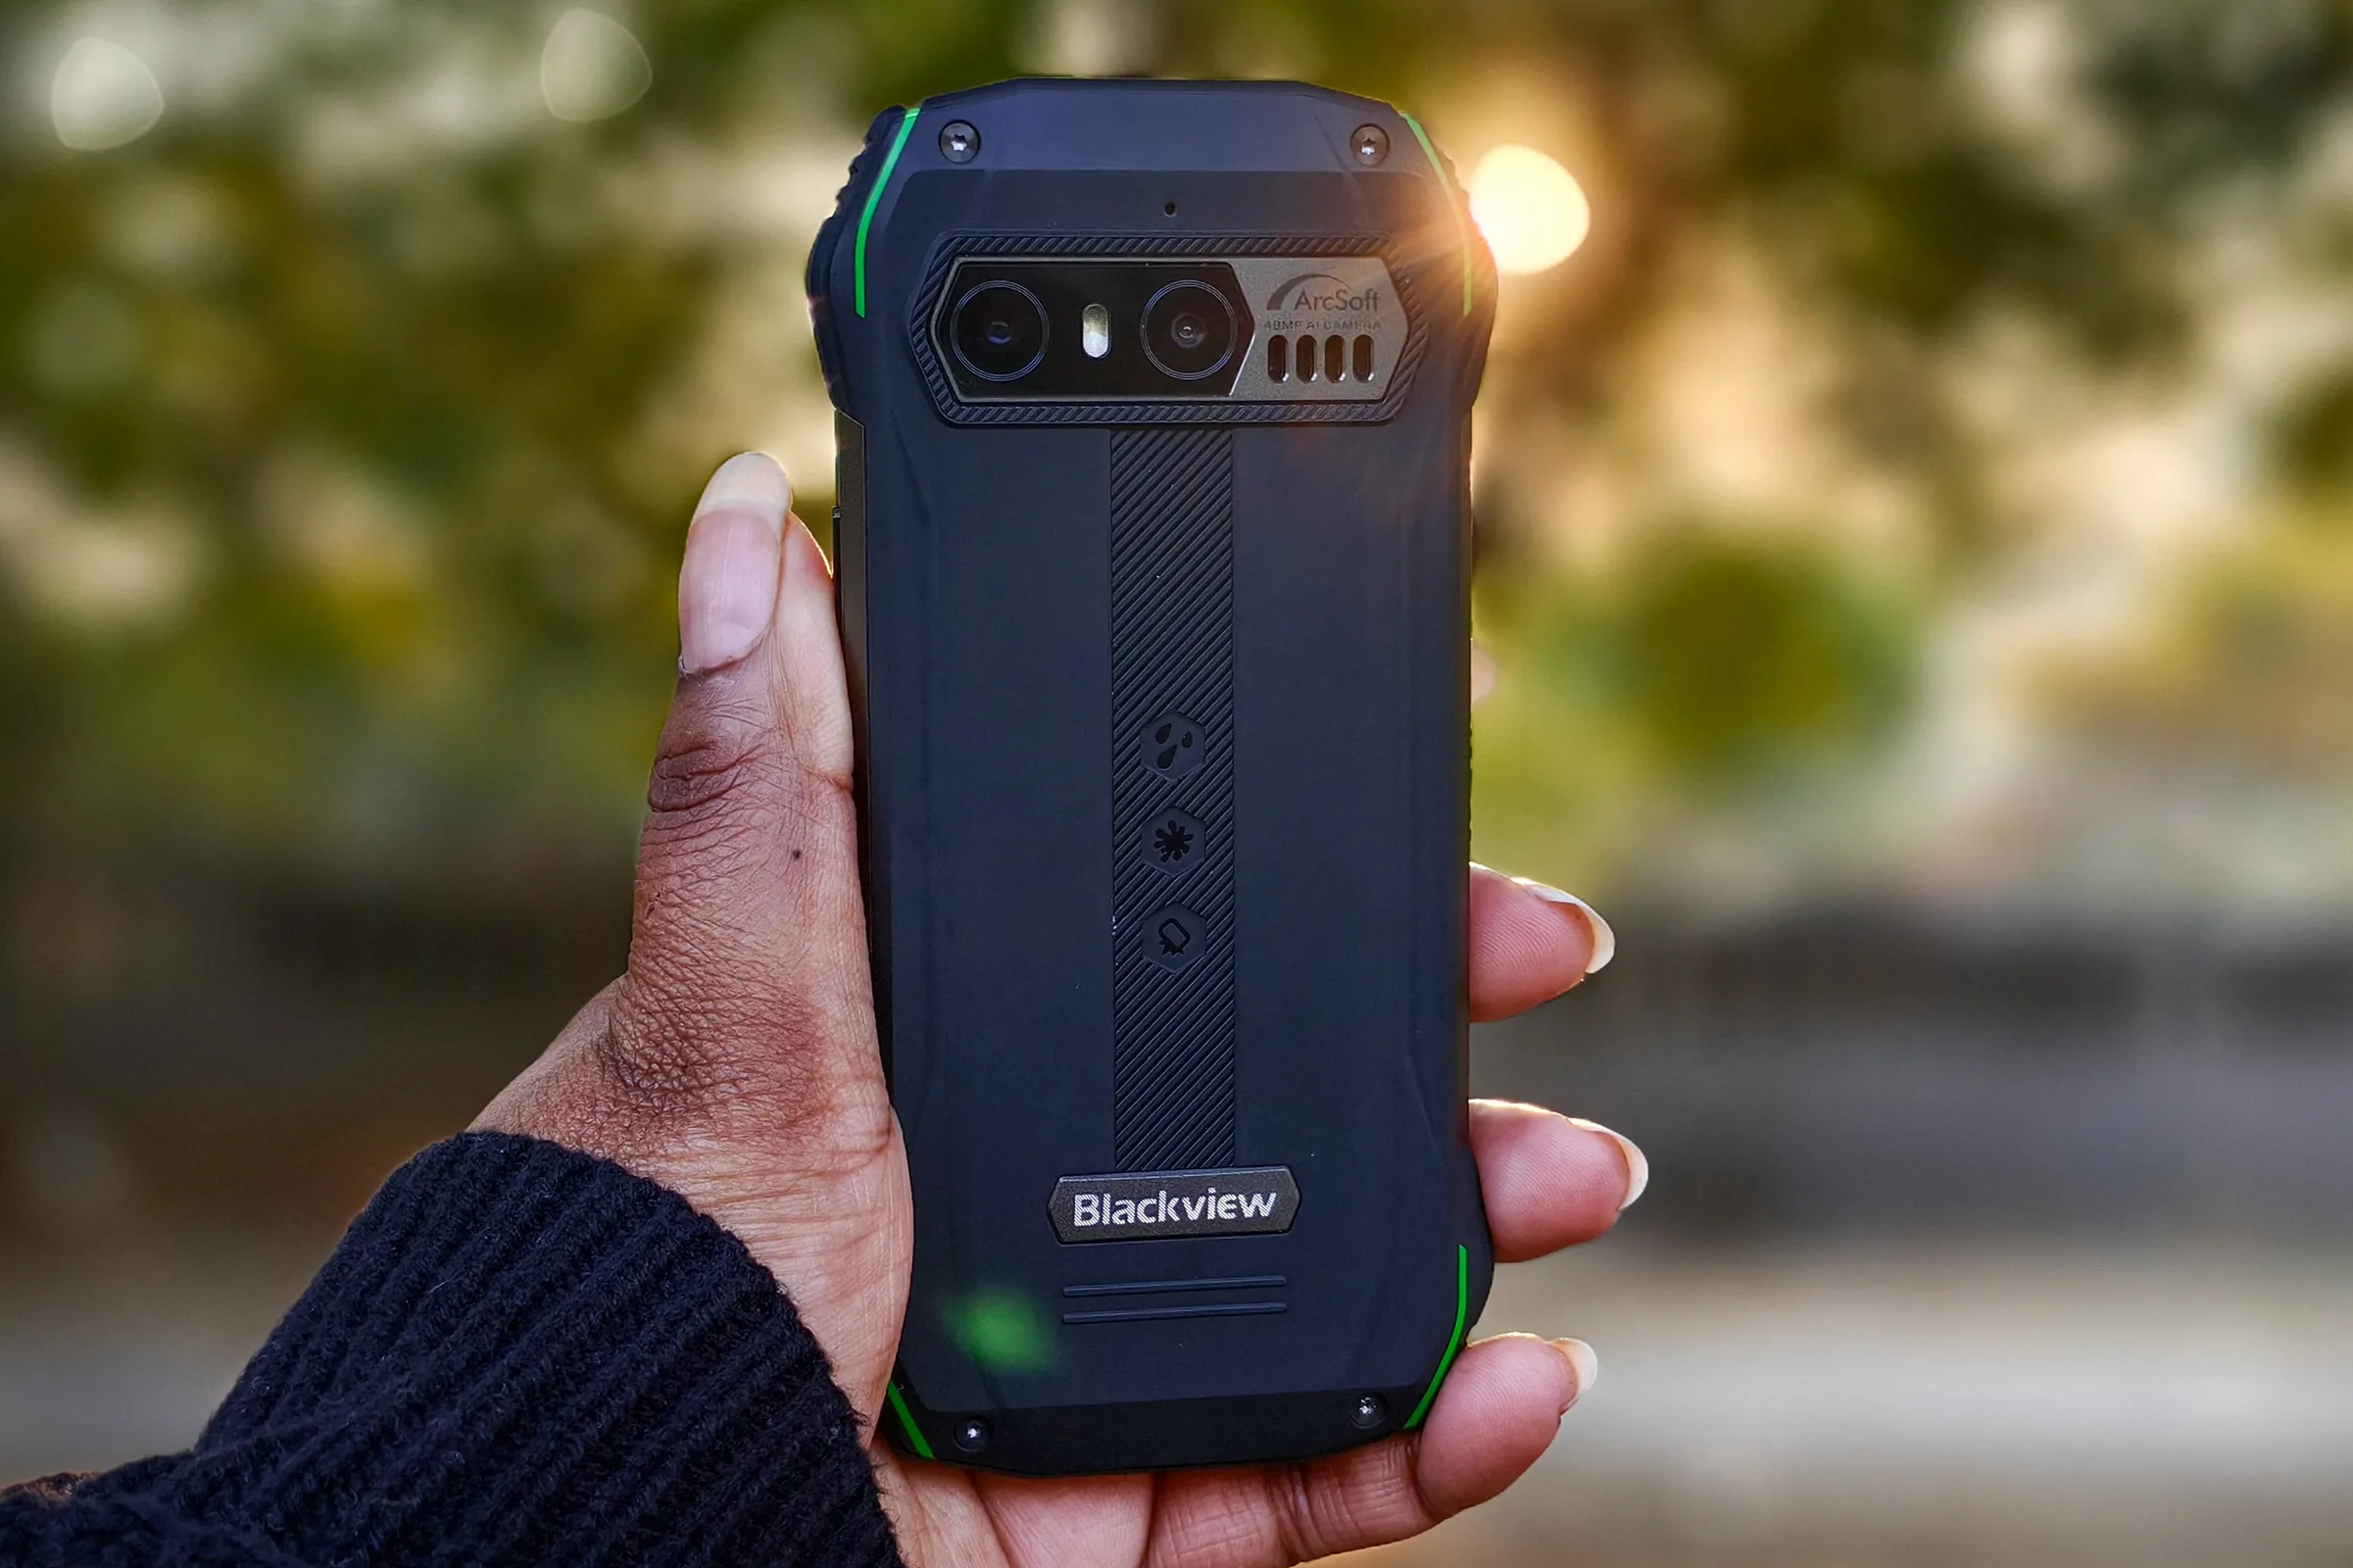 Person holding Blacview N6000 tiny rugged Android phone in hand against the setting sun peaking through trees.